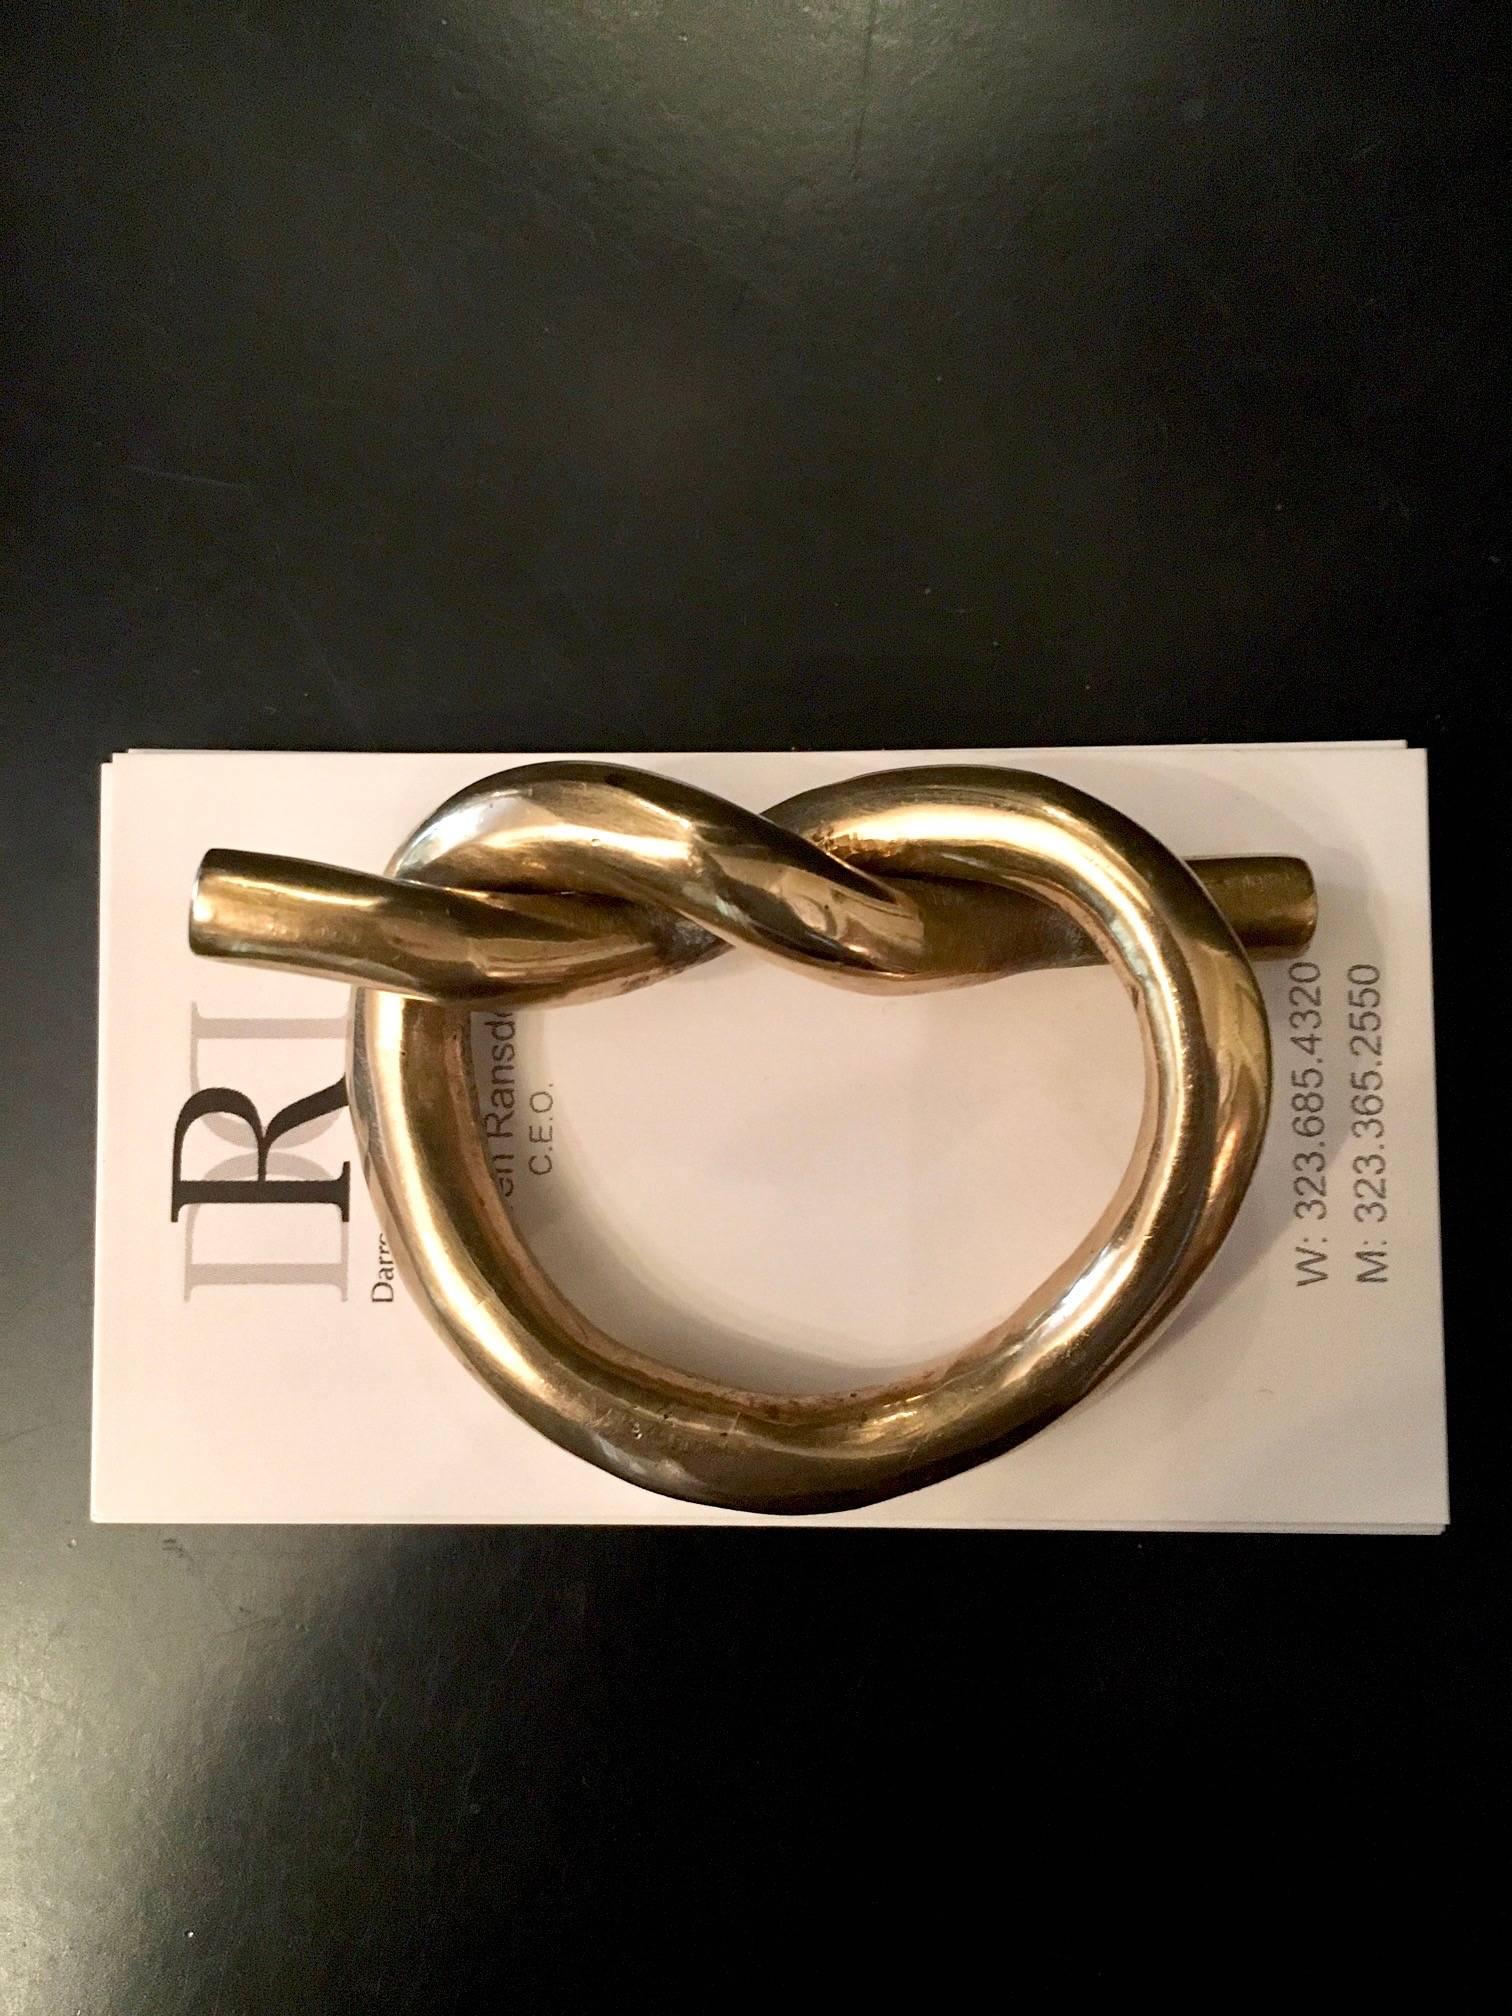 Simple and elegant - the small paper weight perfect for your tidy and functional desk. A Brass knot (or heart) ready to hold down the fort on those small things you treasure!

 